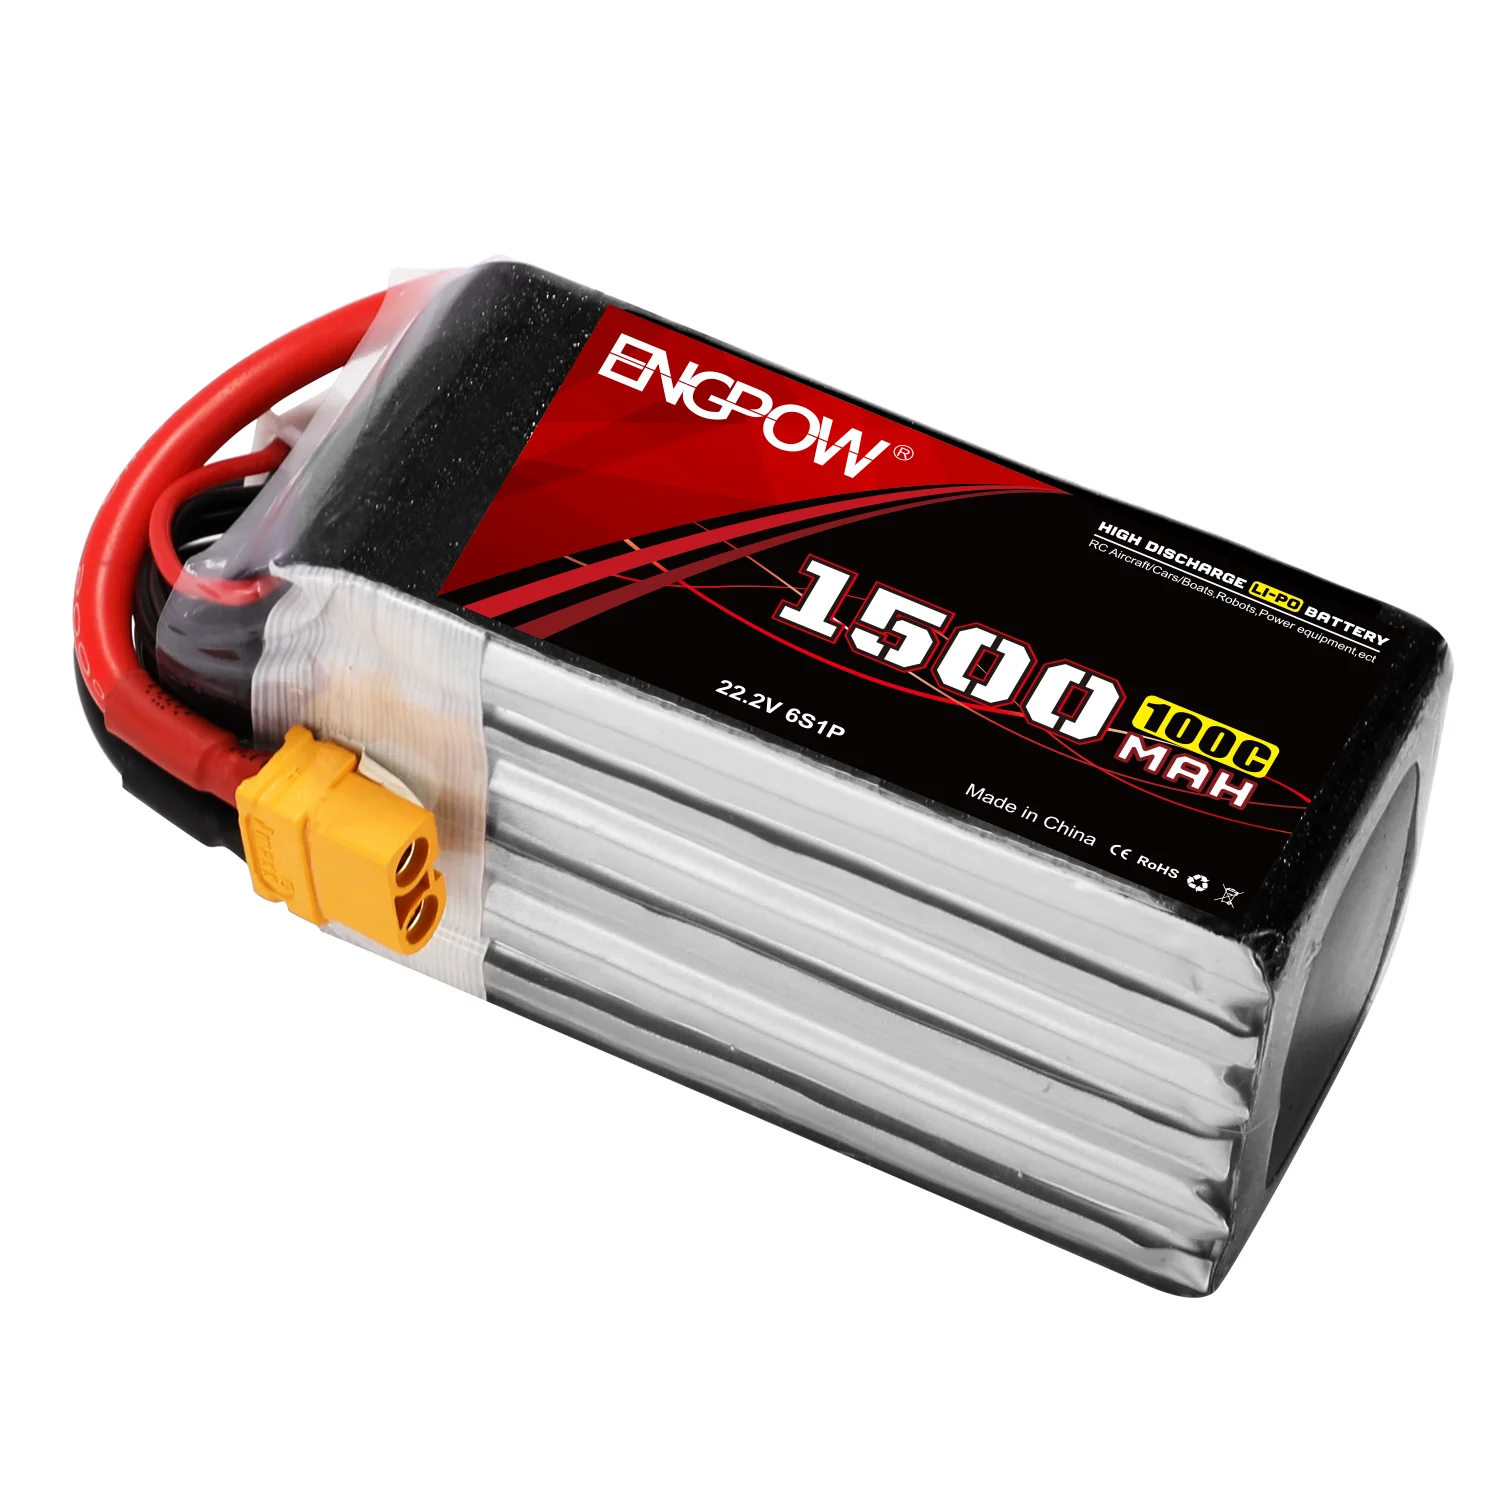 OEM 22.2v 1500mAh 100C 6S1P for Rc Hobby LiPo Lithium Rechargeable Battery Pack